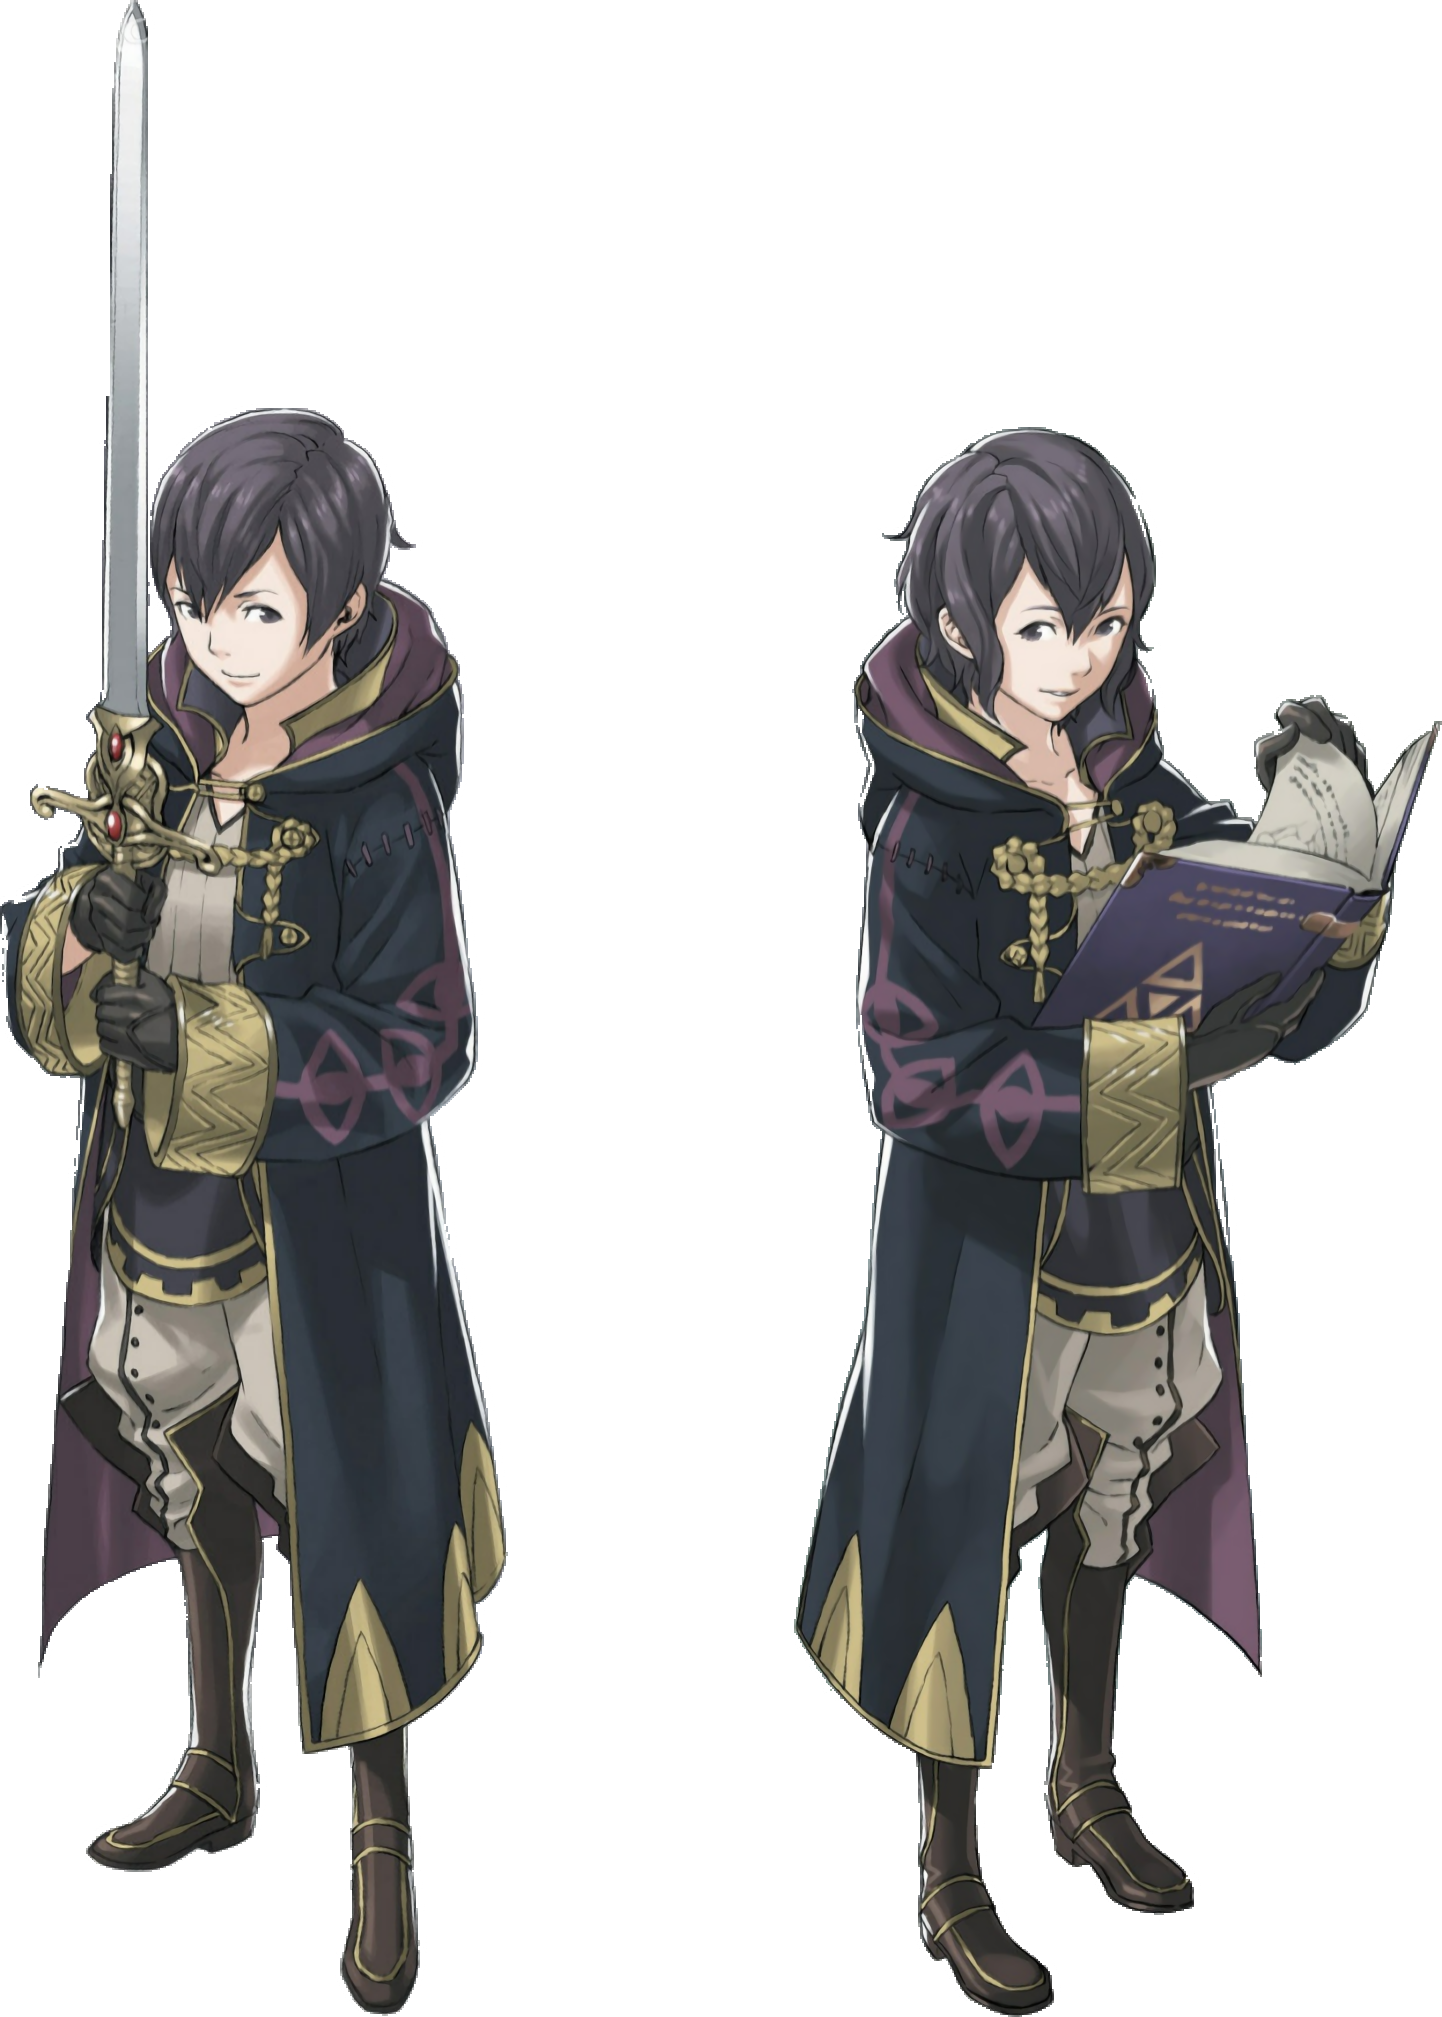 http://images3.wikia.nocookie.net/__cb20130507235049/fireemblem/images/8/89/Morgan_(FE13_Artwork).png